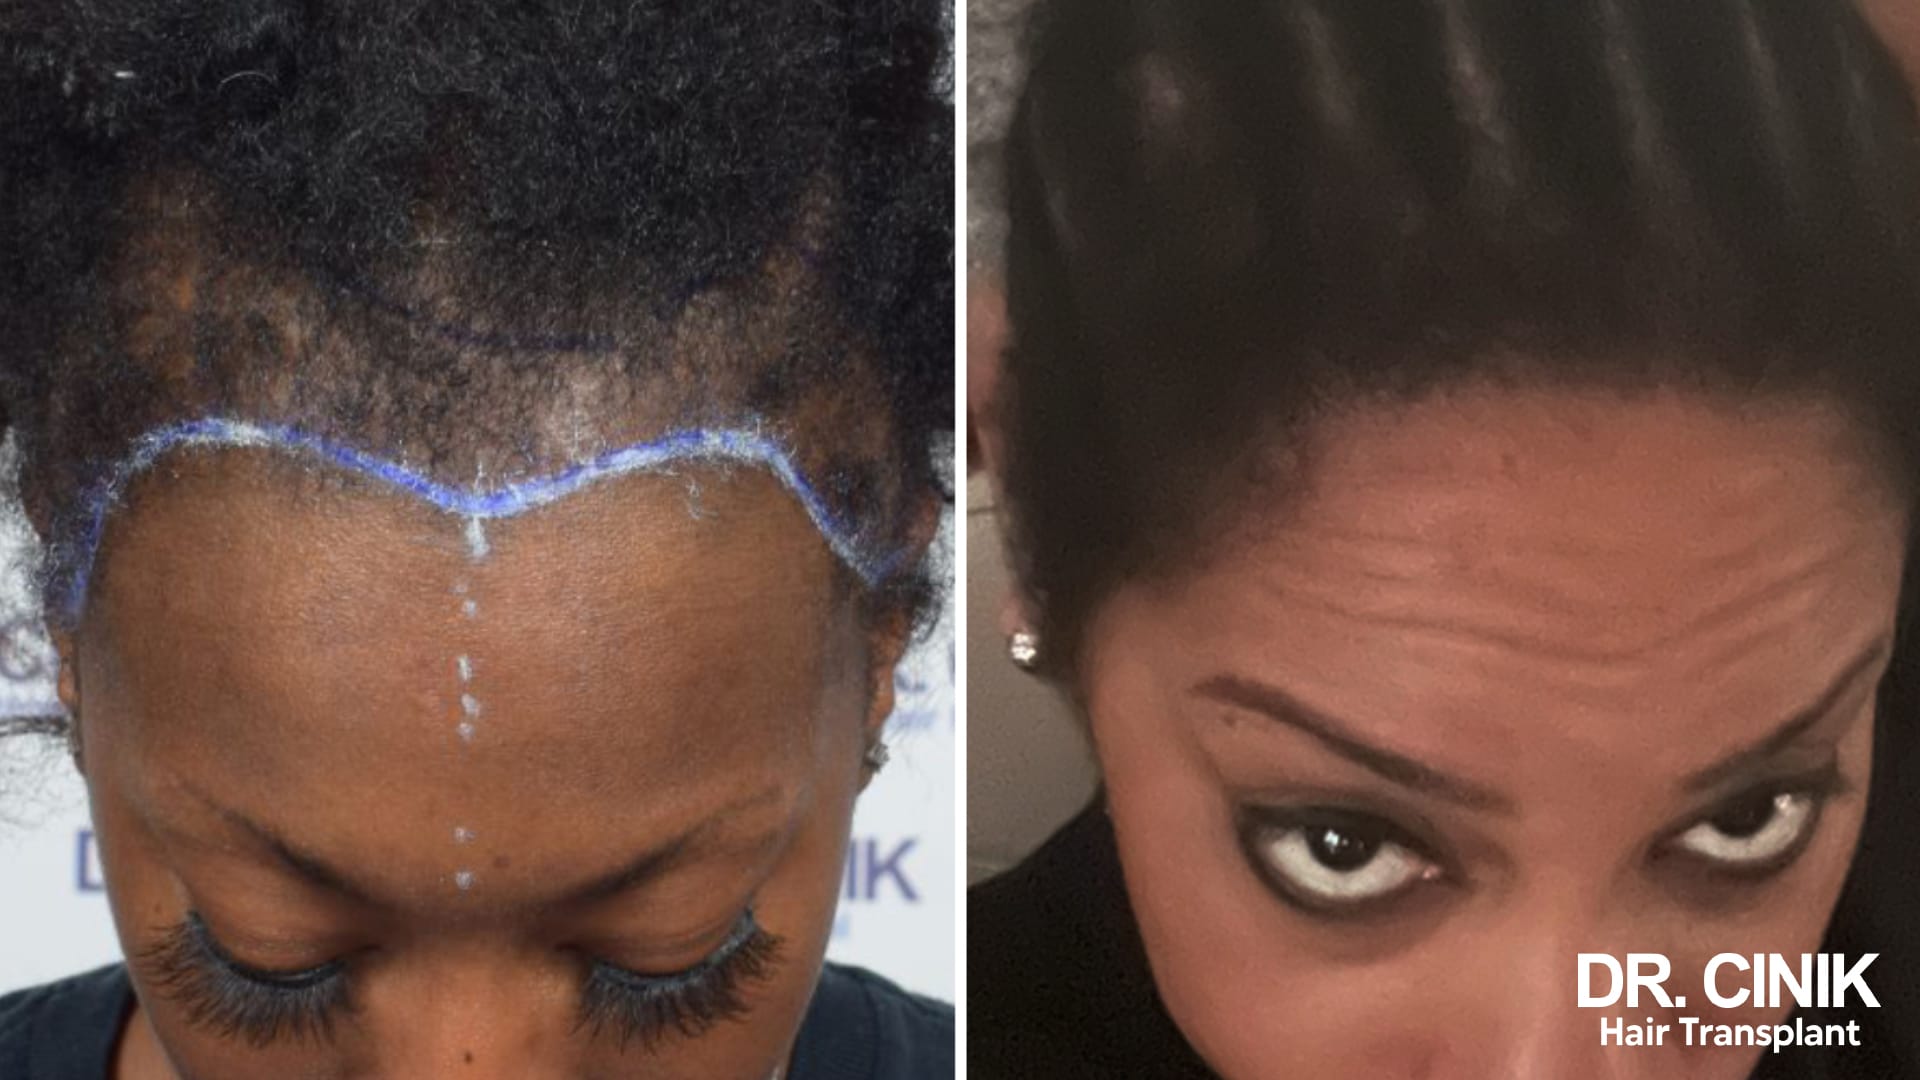 Afro hair transplant for traction alopecia: before and after